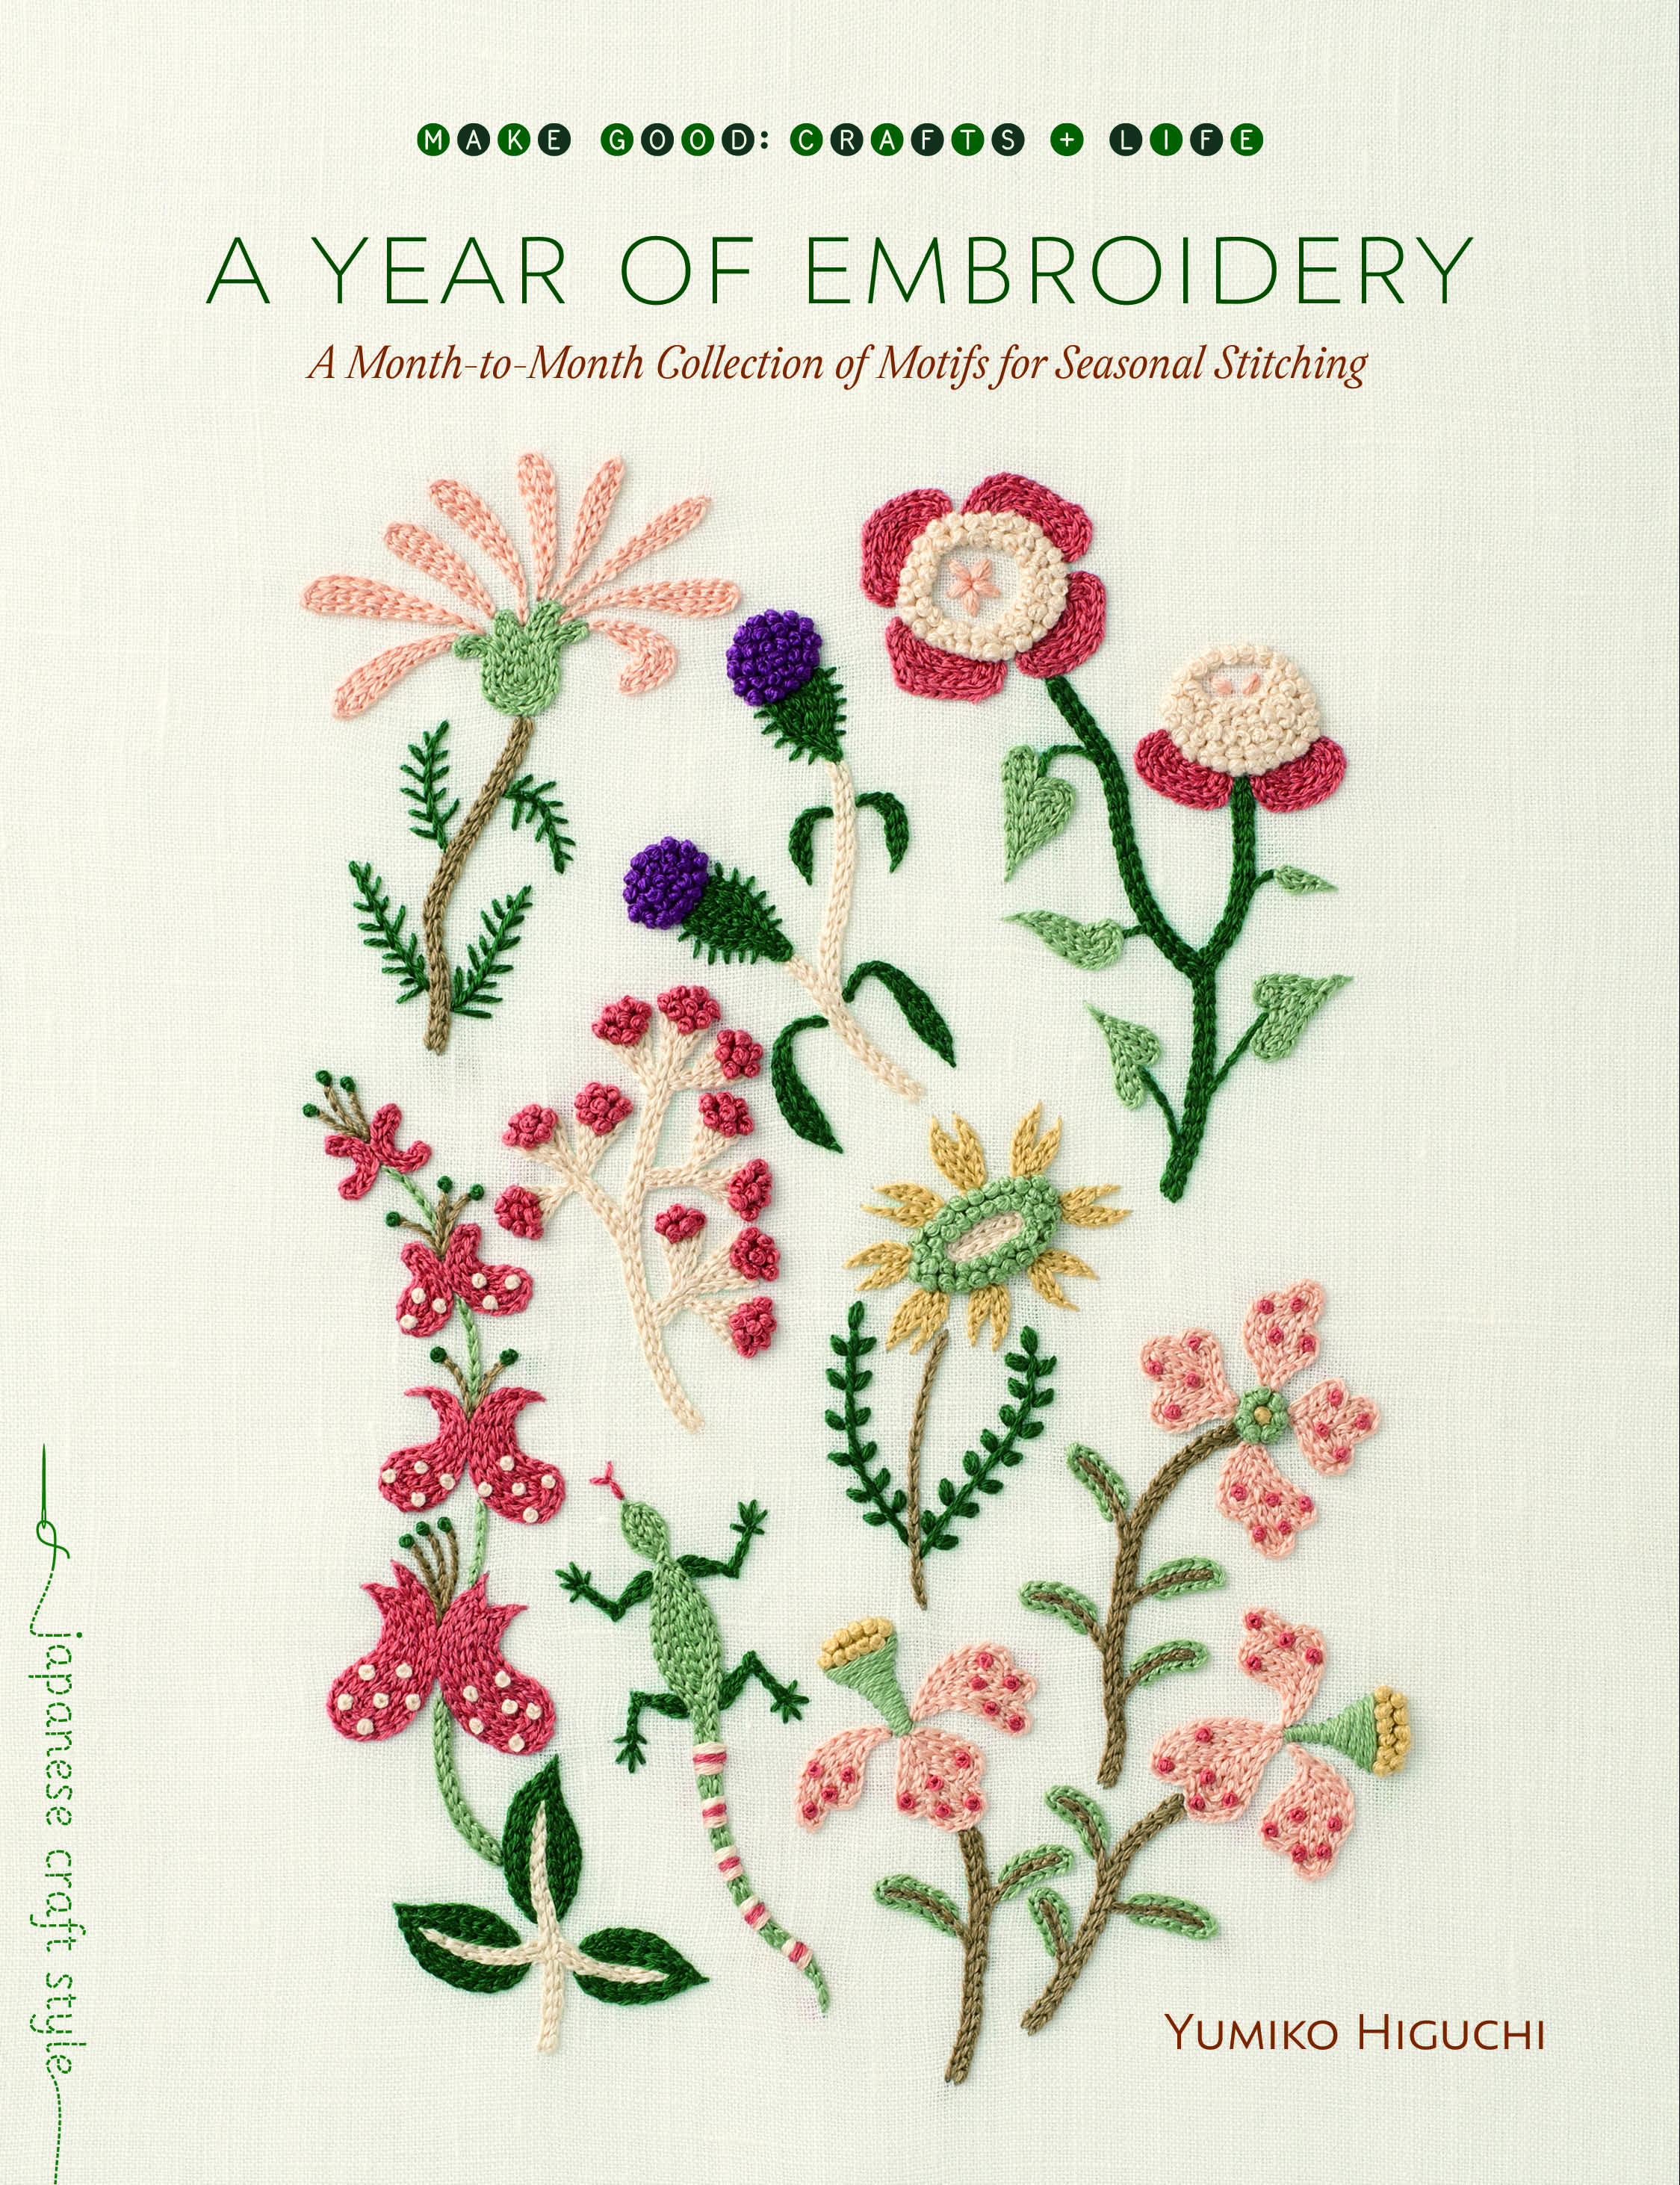 Embroidery Pattern Books Diy Floral Cactus Embroidery Projects From A Year Of Embroidery